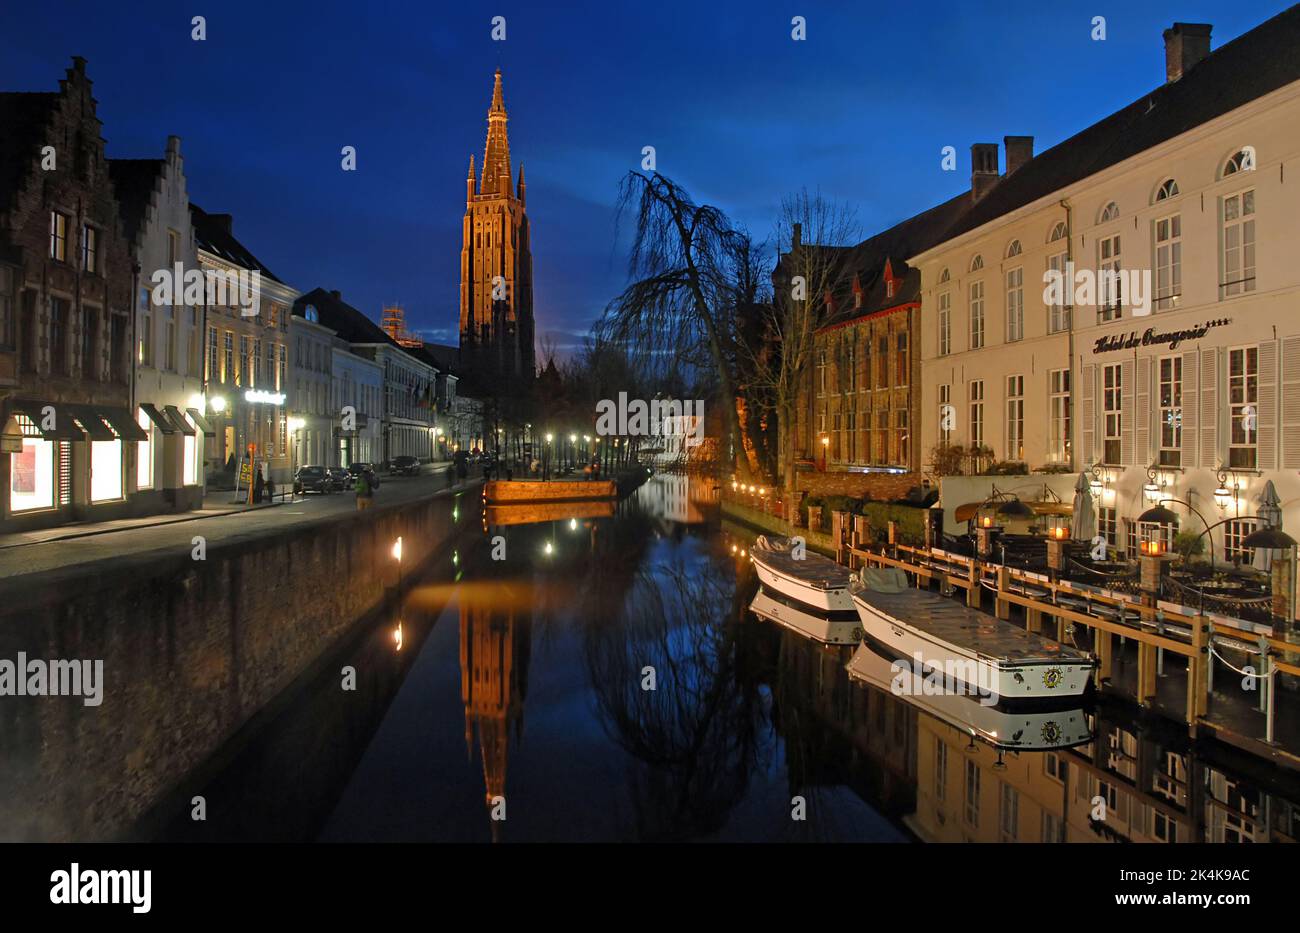 Brugge or Bruges, West Flanders, Belgium : The Dijver Canal in Brugge at night with the Onze Lieve Vrouwekerk or Church of Our Lady. Stock Photo